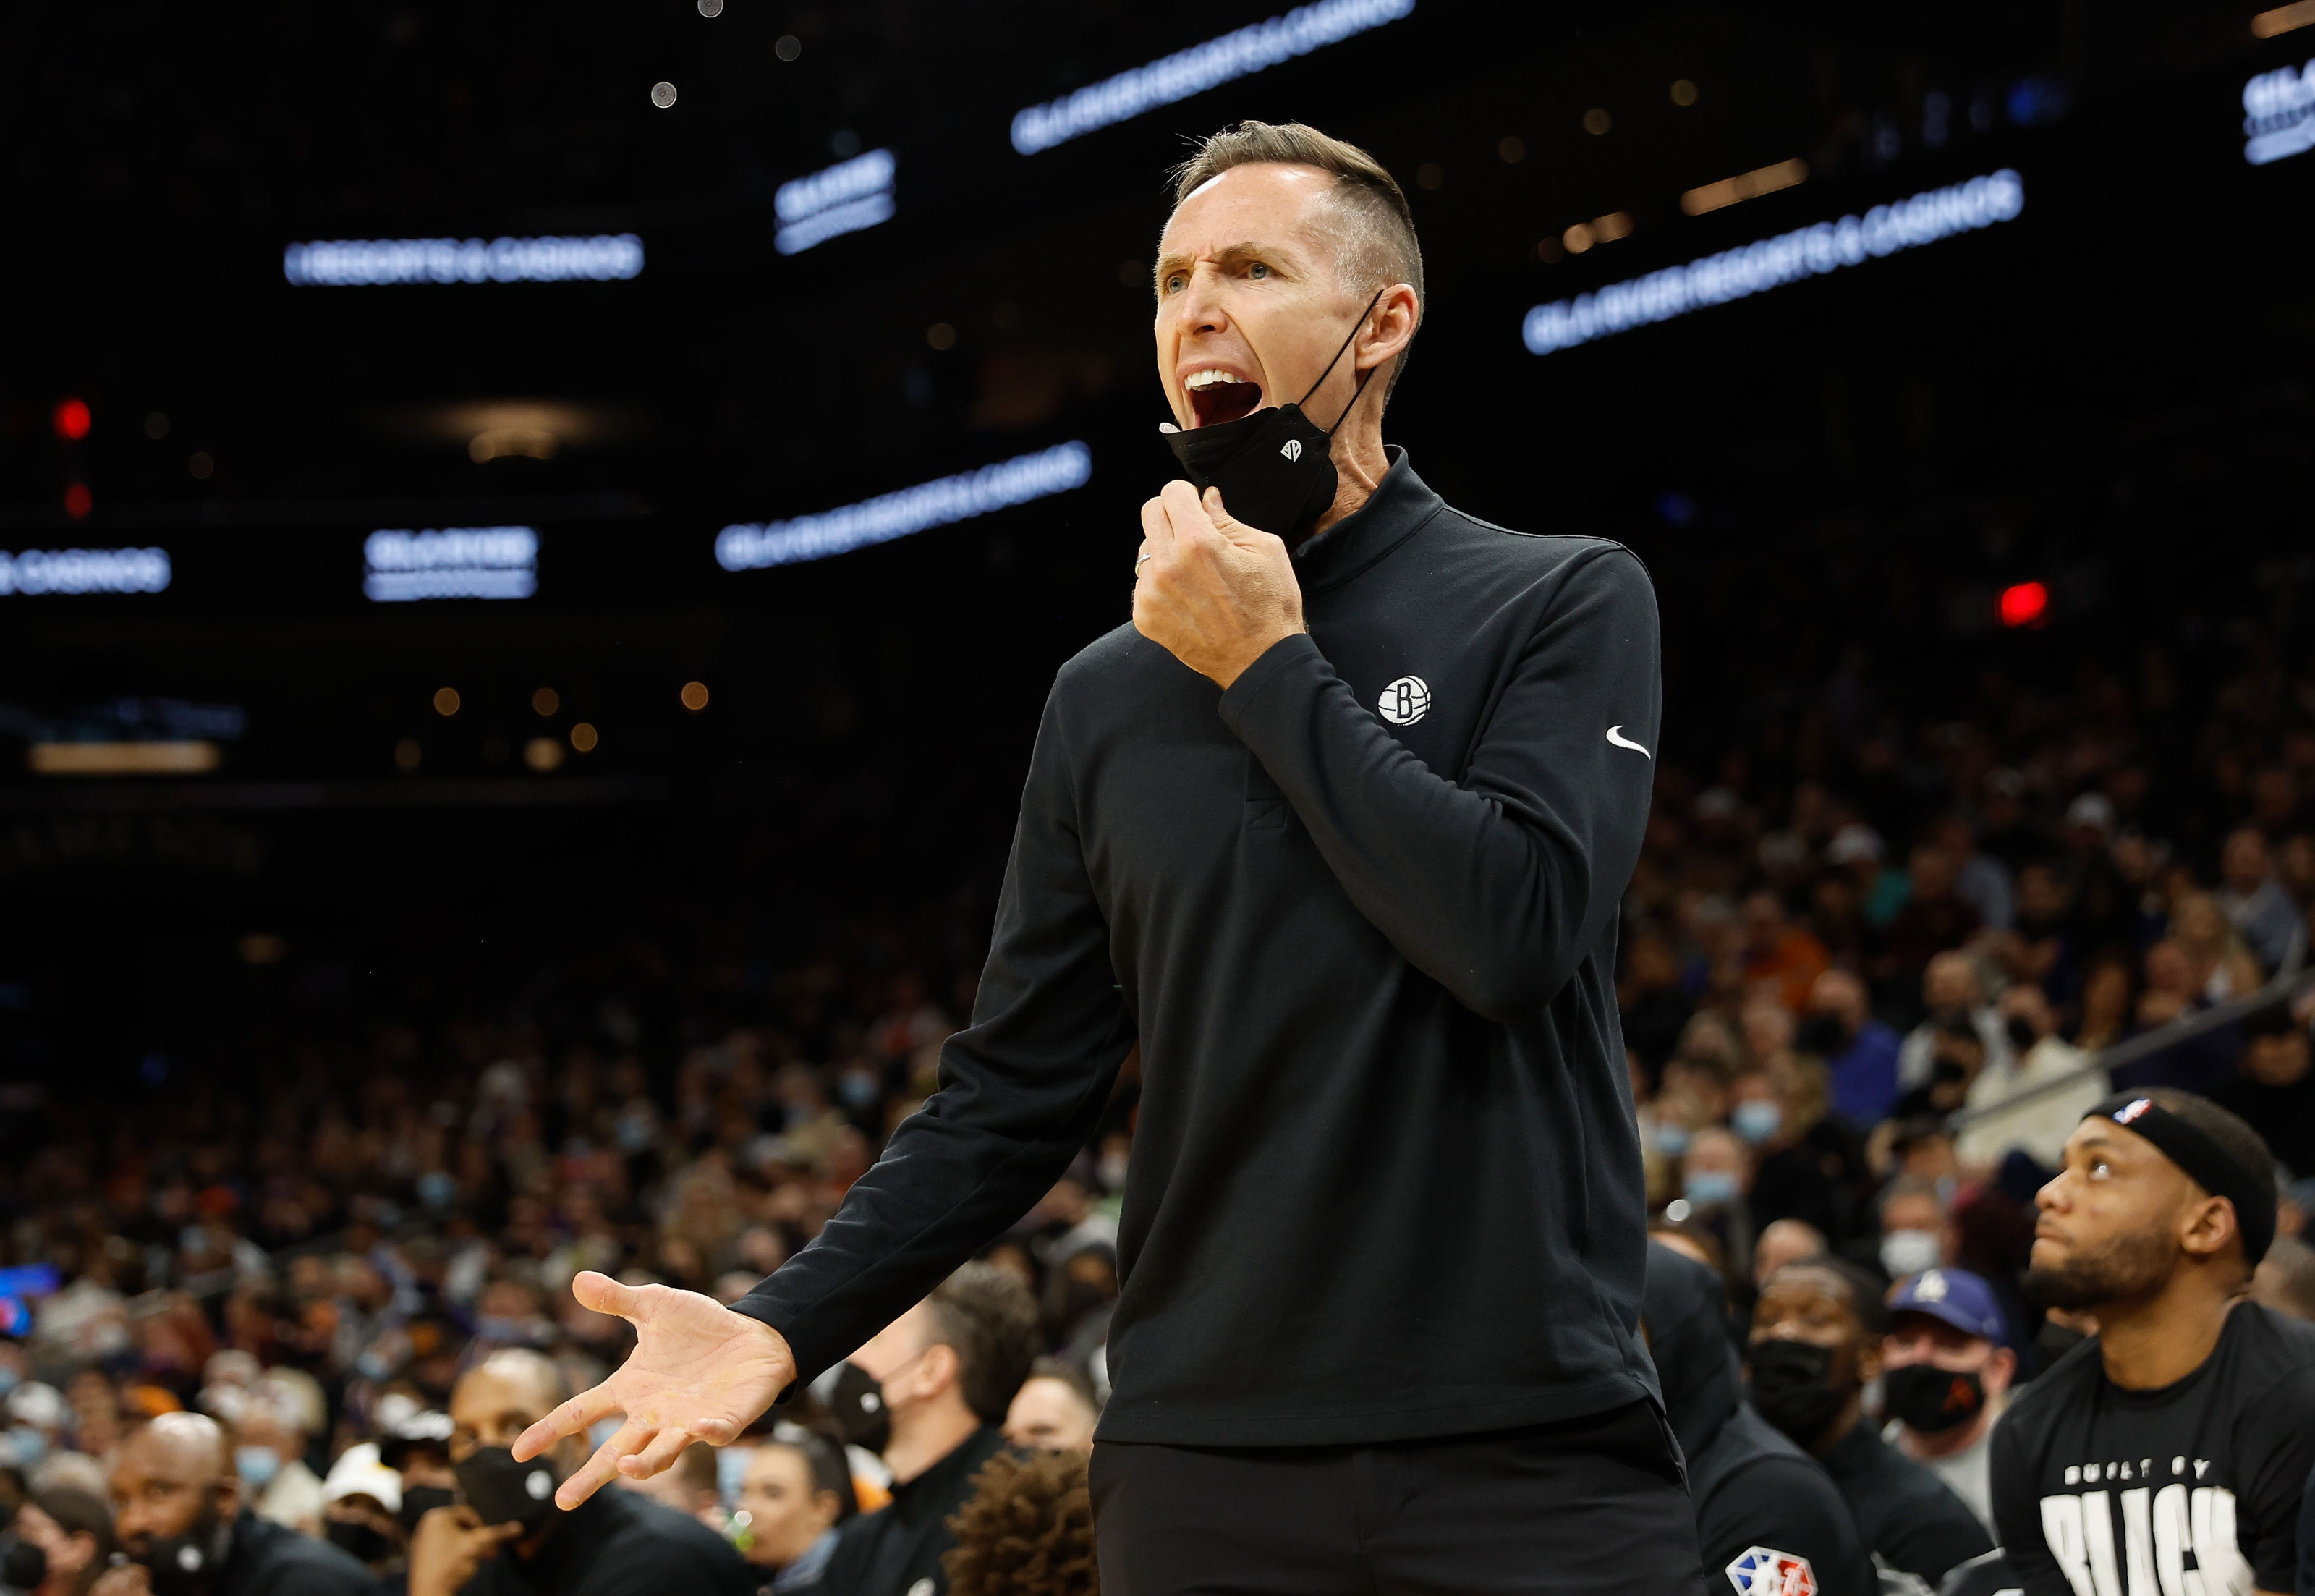 Steve Nash explains why Curry isn't considered great